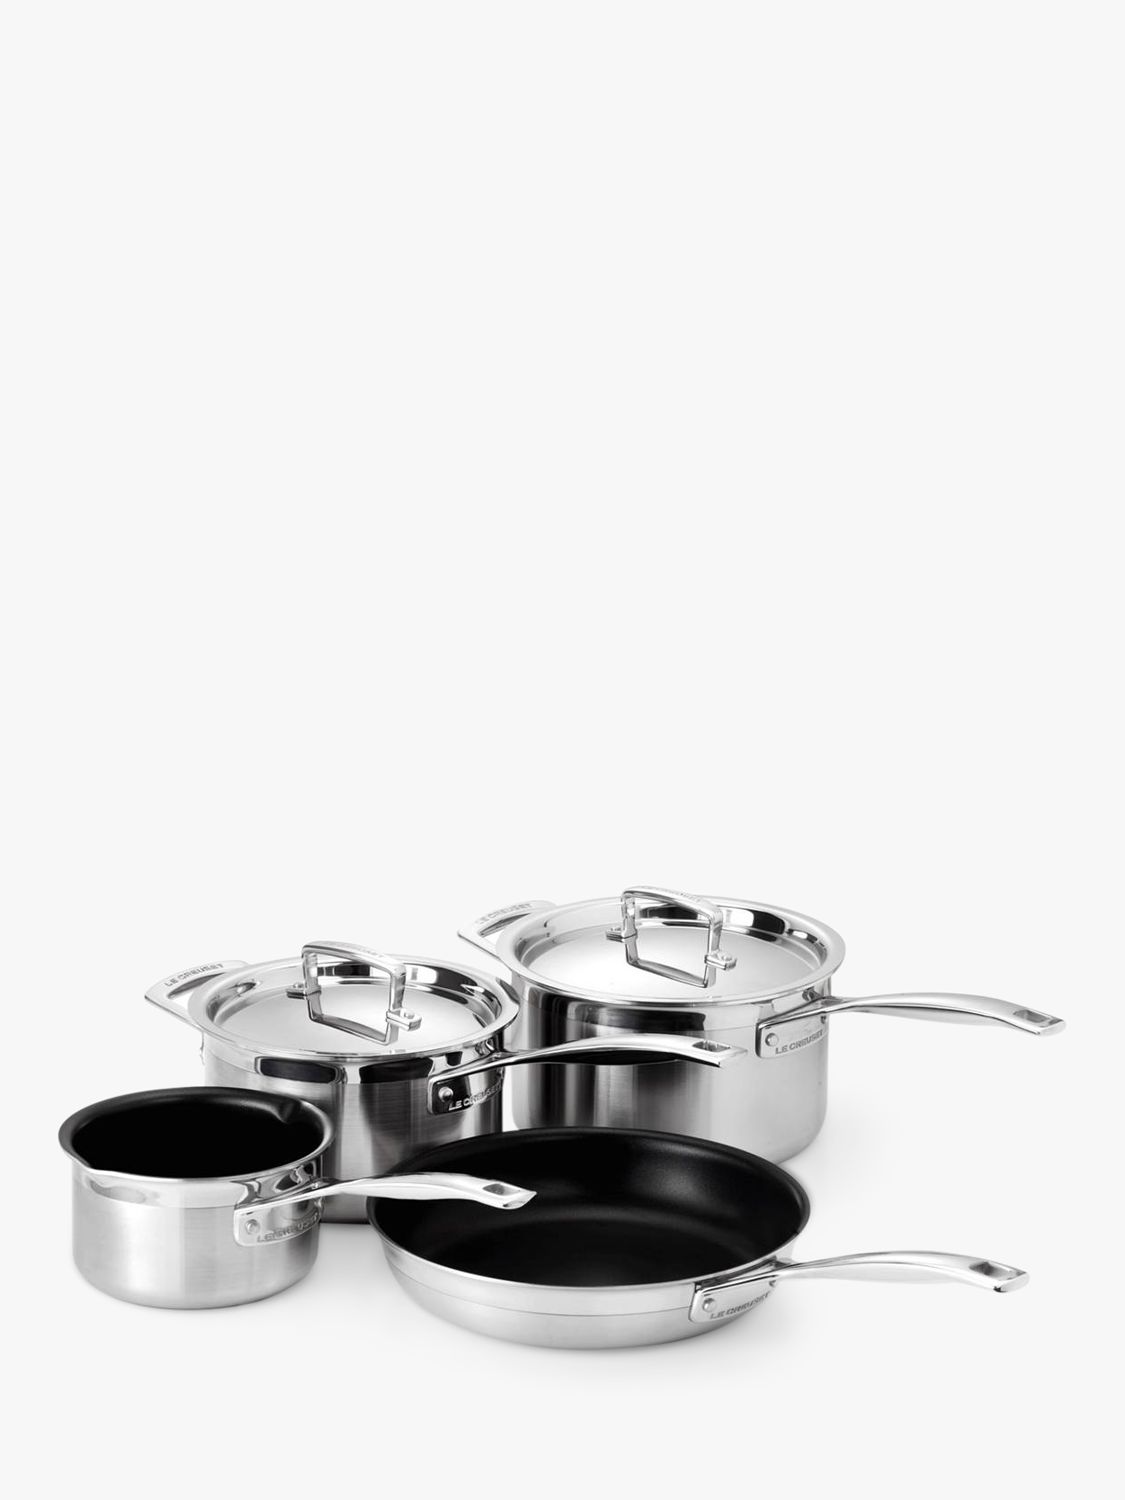 ZWILLING Energy Plus 10-pc Stainless Steel Ceramic Nonstick Cookware Set,  10-pc - Ralphs